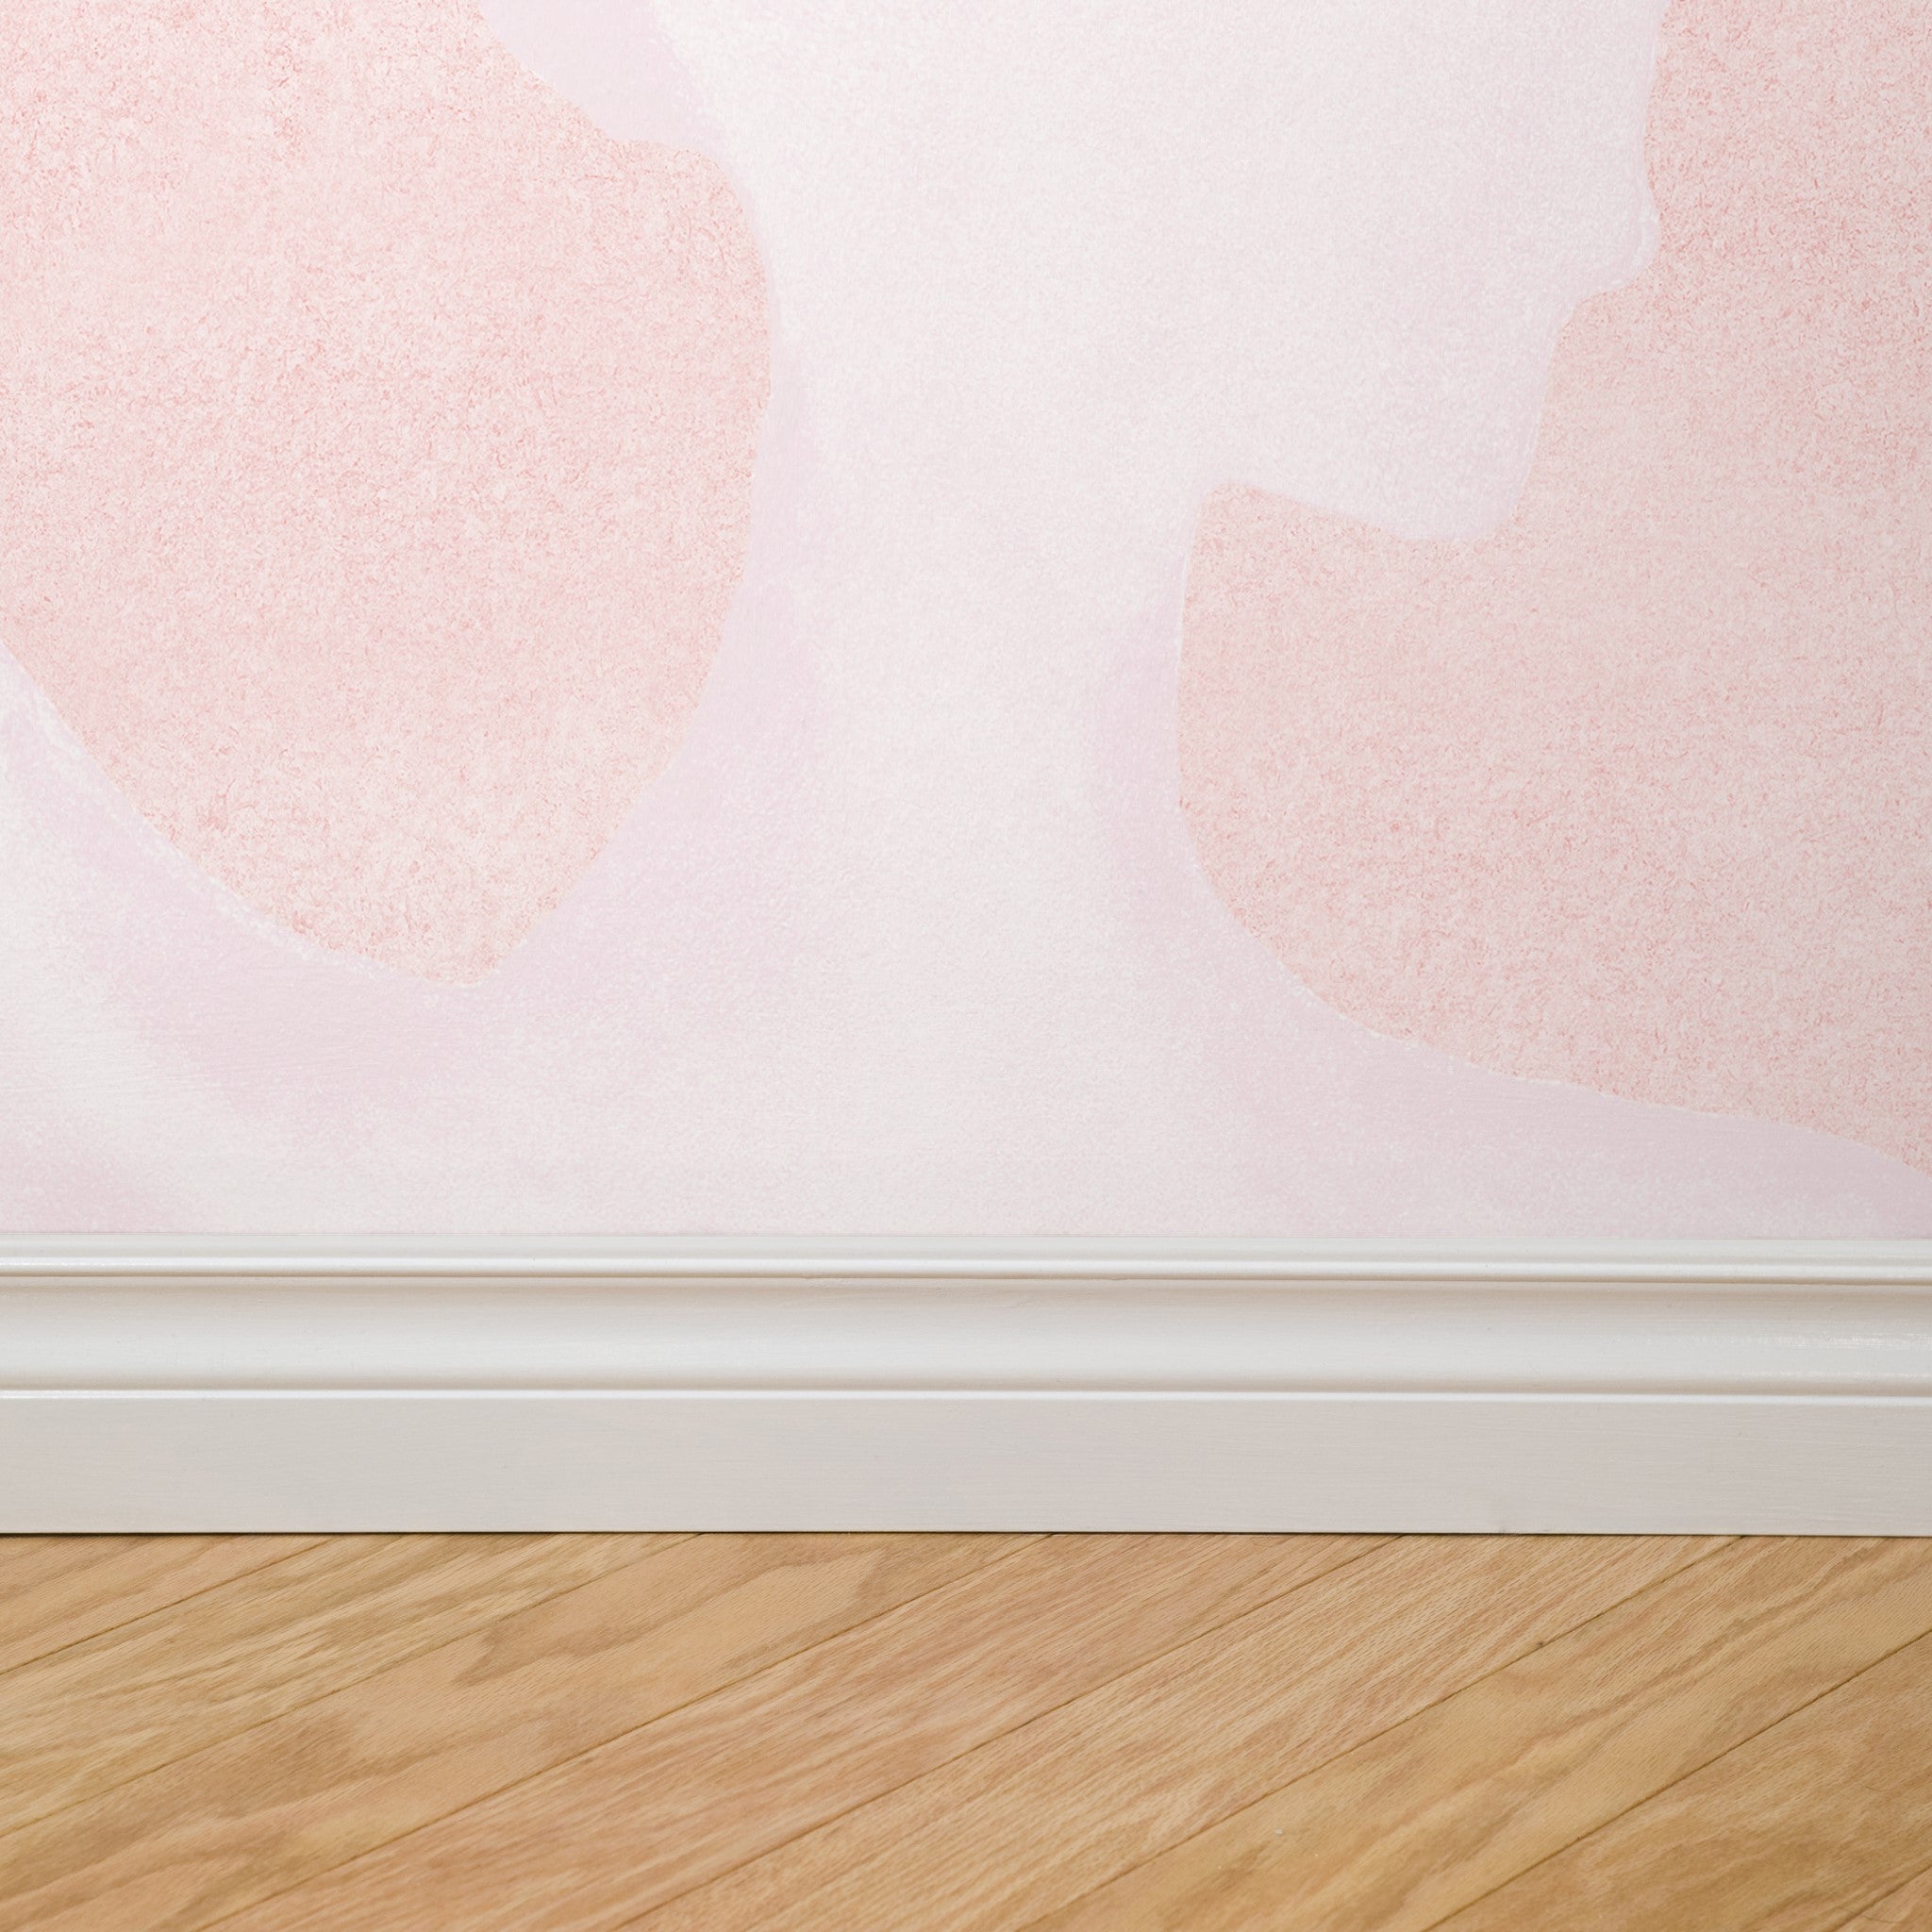 "Pirouette Pattern Edition Wallpaper by Wall Blush installed in a modern room, focus on pink patterned wall decor."